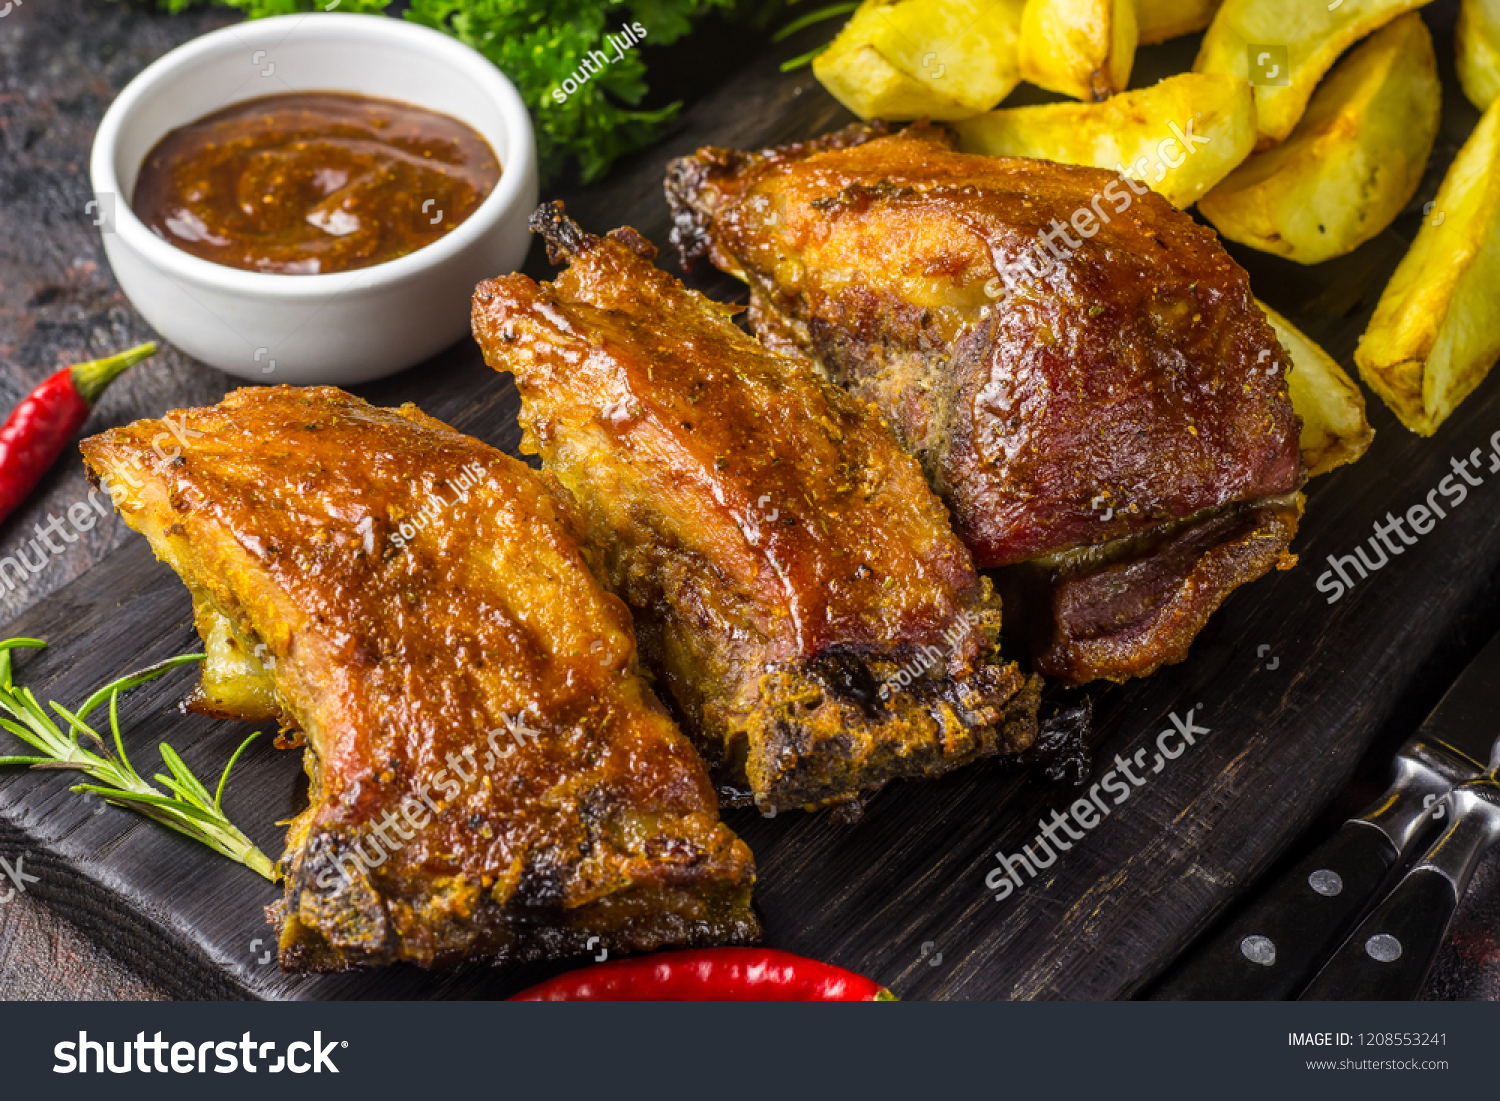 Barbecued pork ribs seasoned with a spicy bbq sauce served with fries on an old rustic wooden chopping board in a country kitchen #1208553241